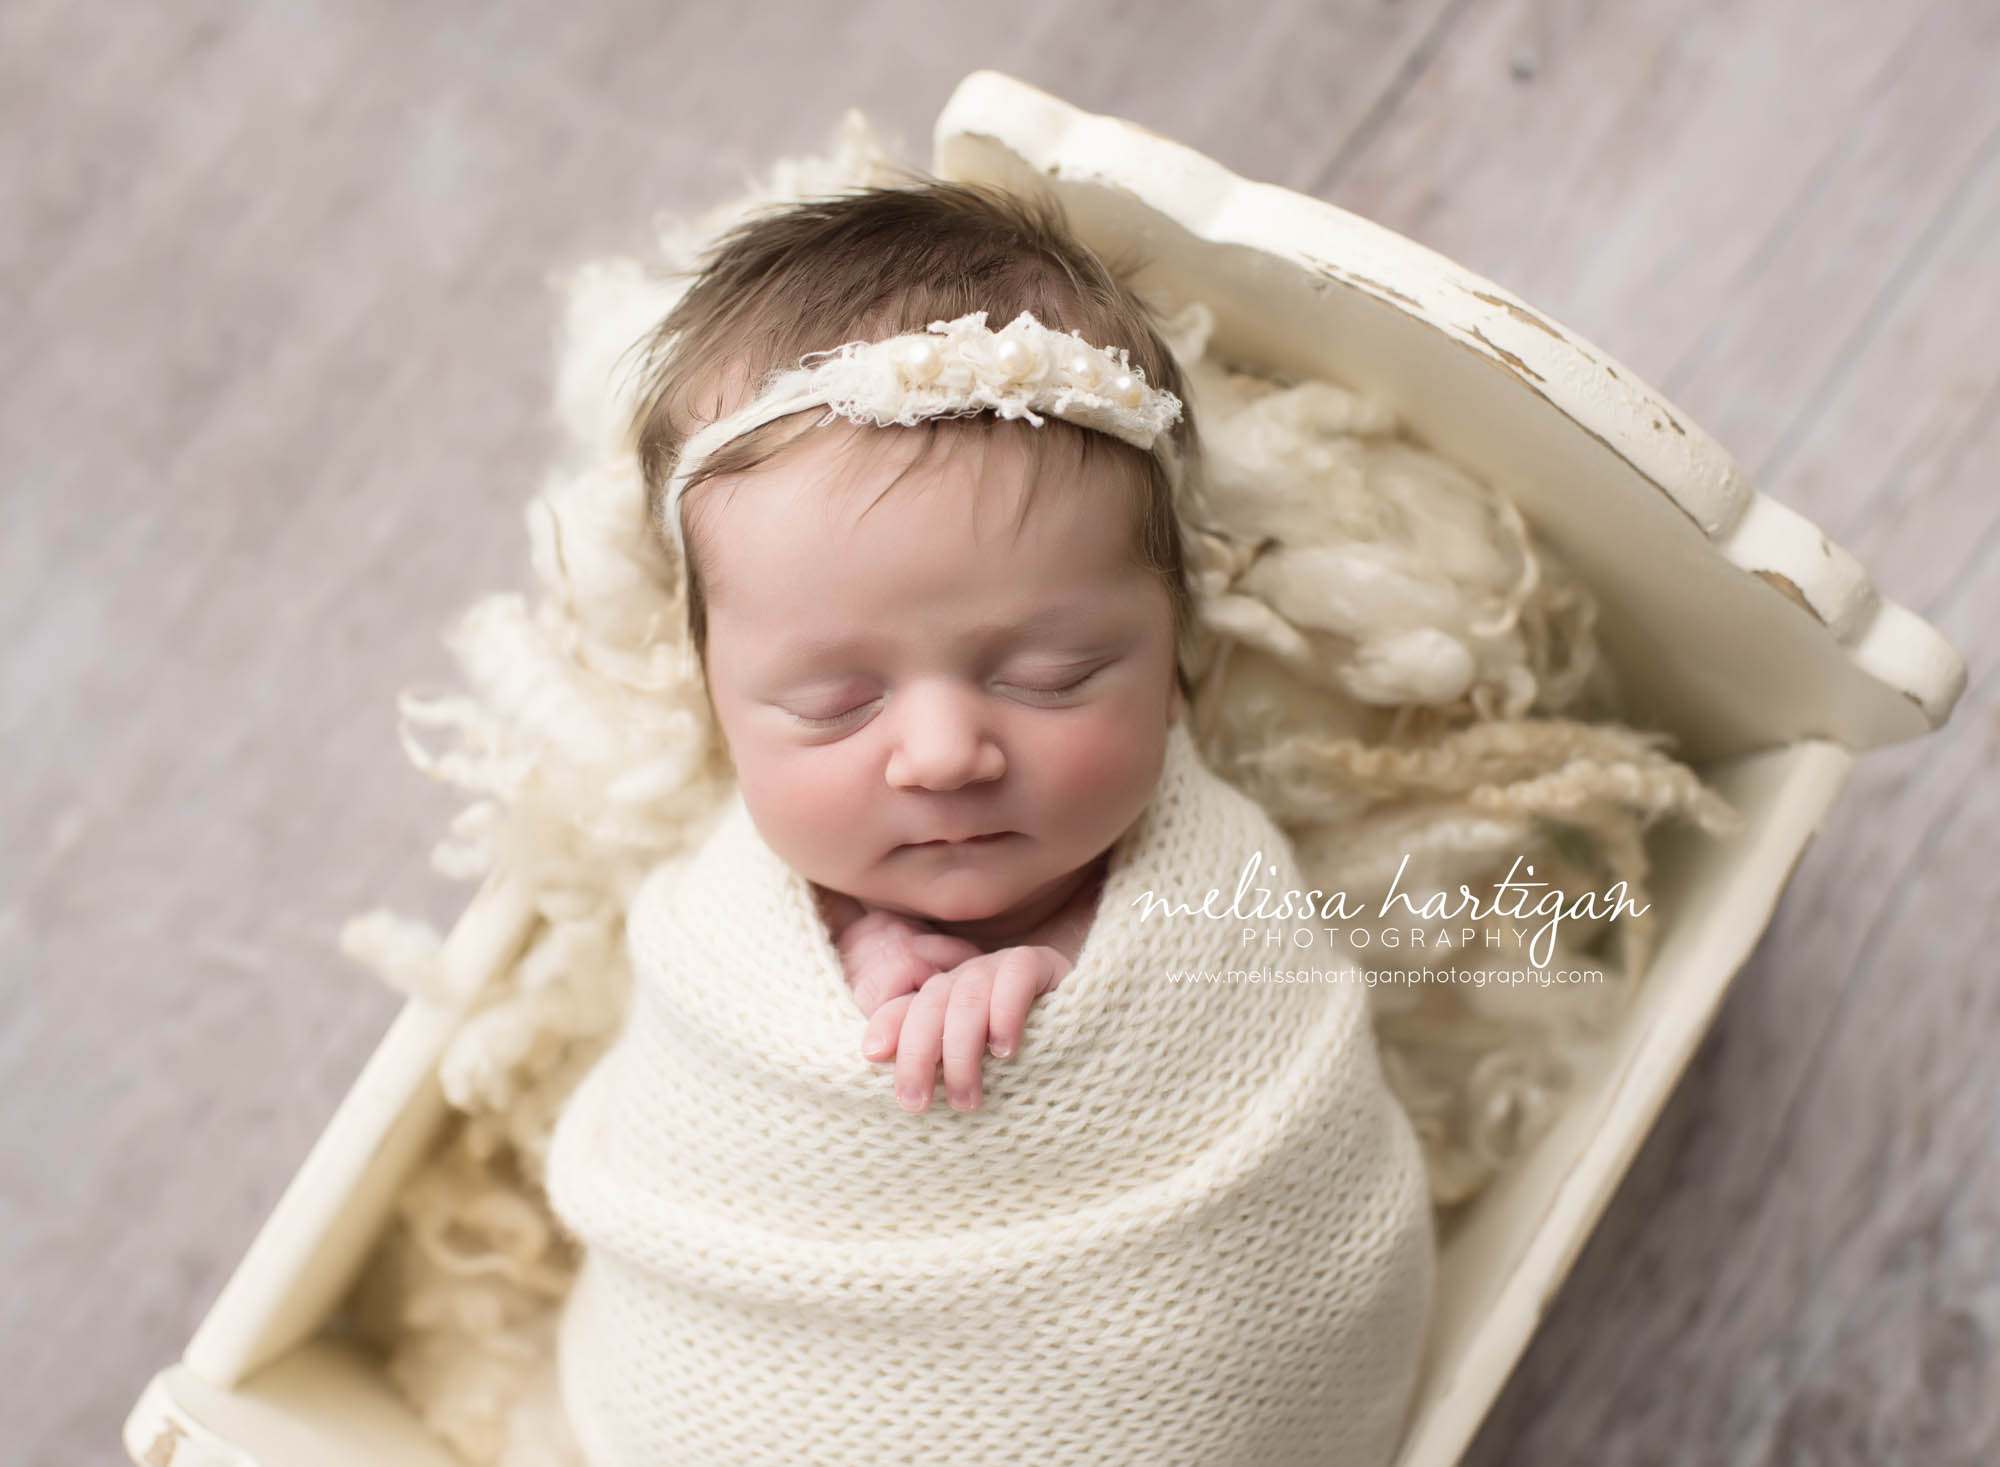 Melissa Hartigan Photography Connecticut Newborn Photographer Coventry Ct Middlefield CT baby Fairfield county Newborn and maternity CT photographer Baby girl white headband and wrap in white wooden bed